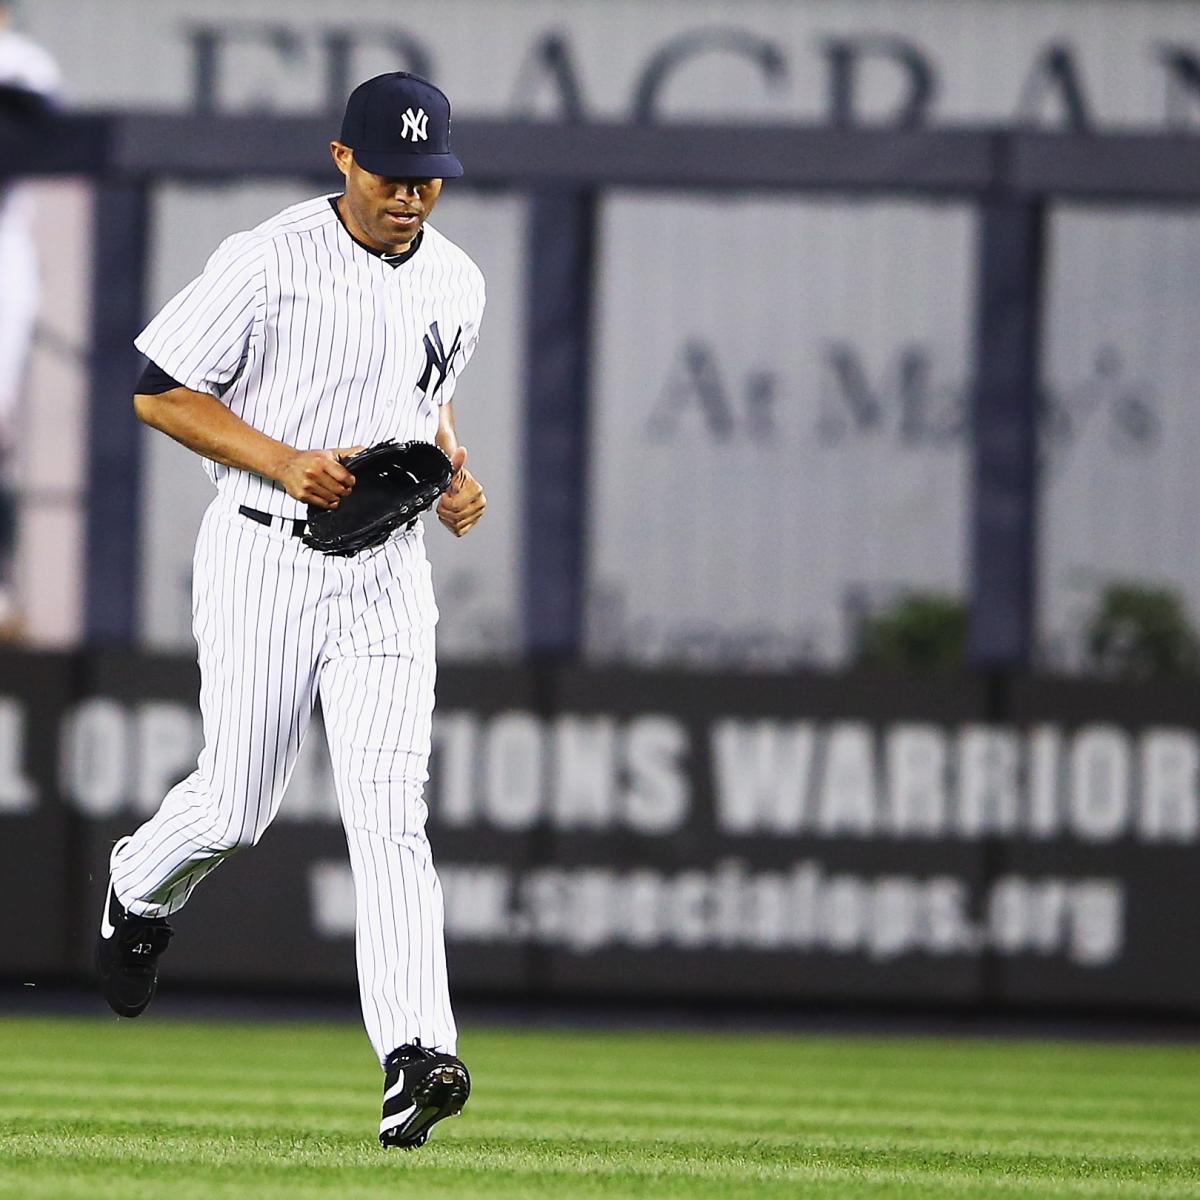 The Greatest 21 Days: Mariano Rivera got out of many tough situations over  19 seasons, he then got into the Hall of Fame